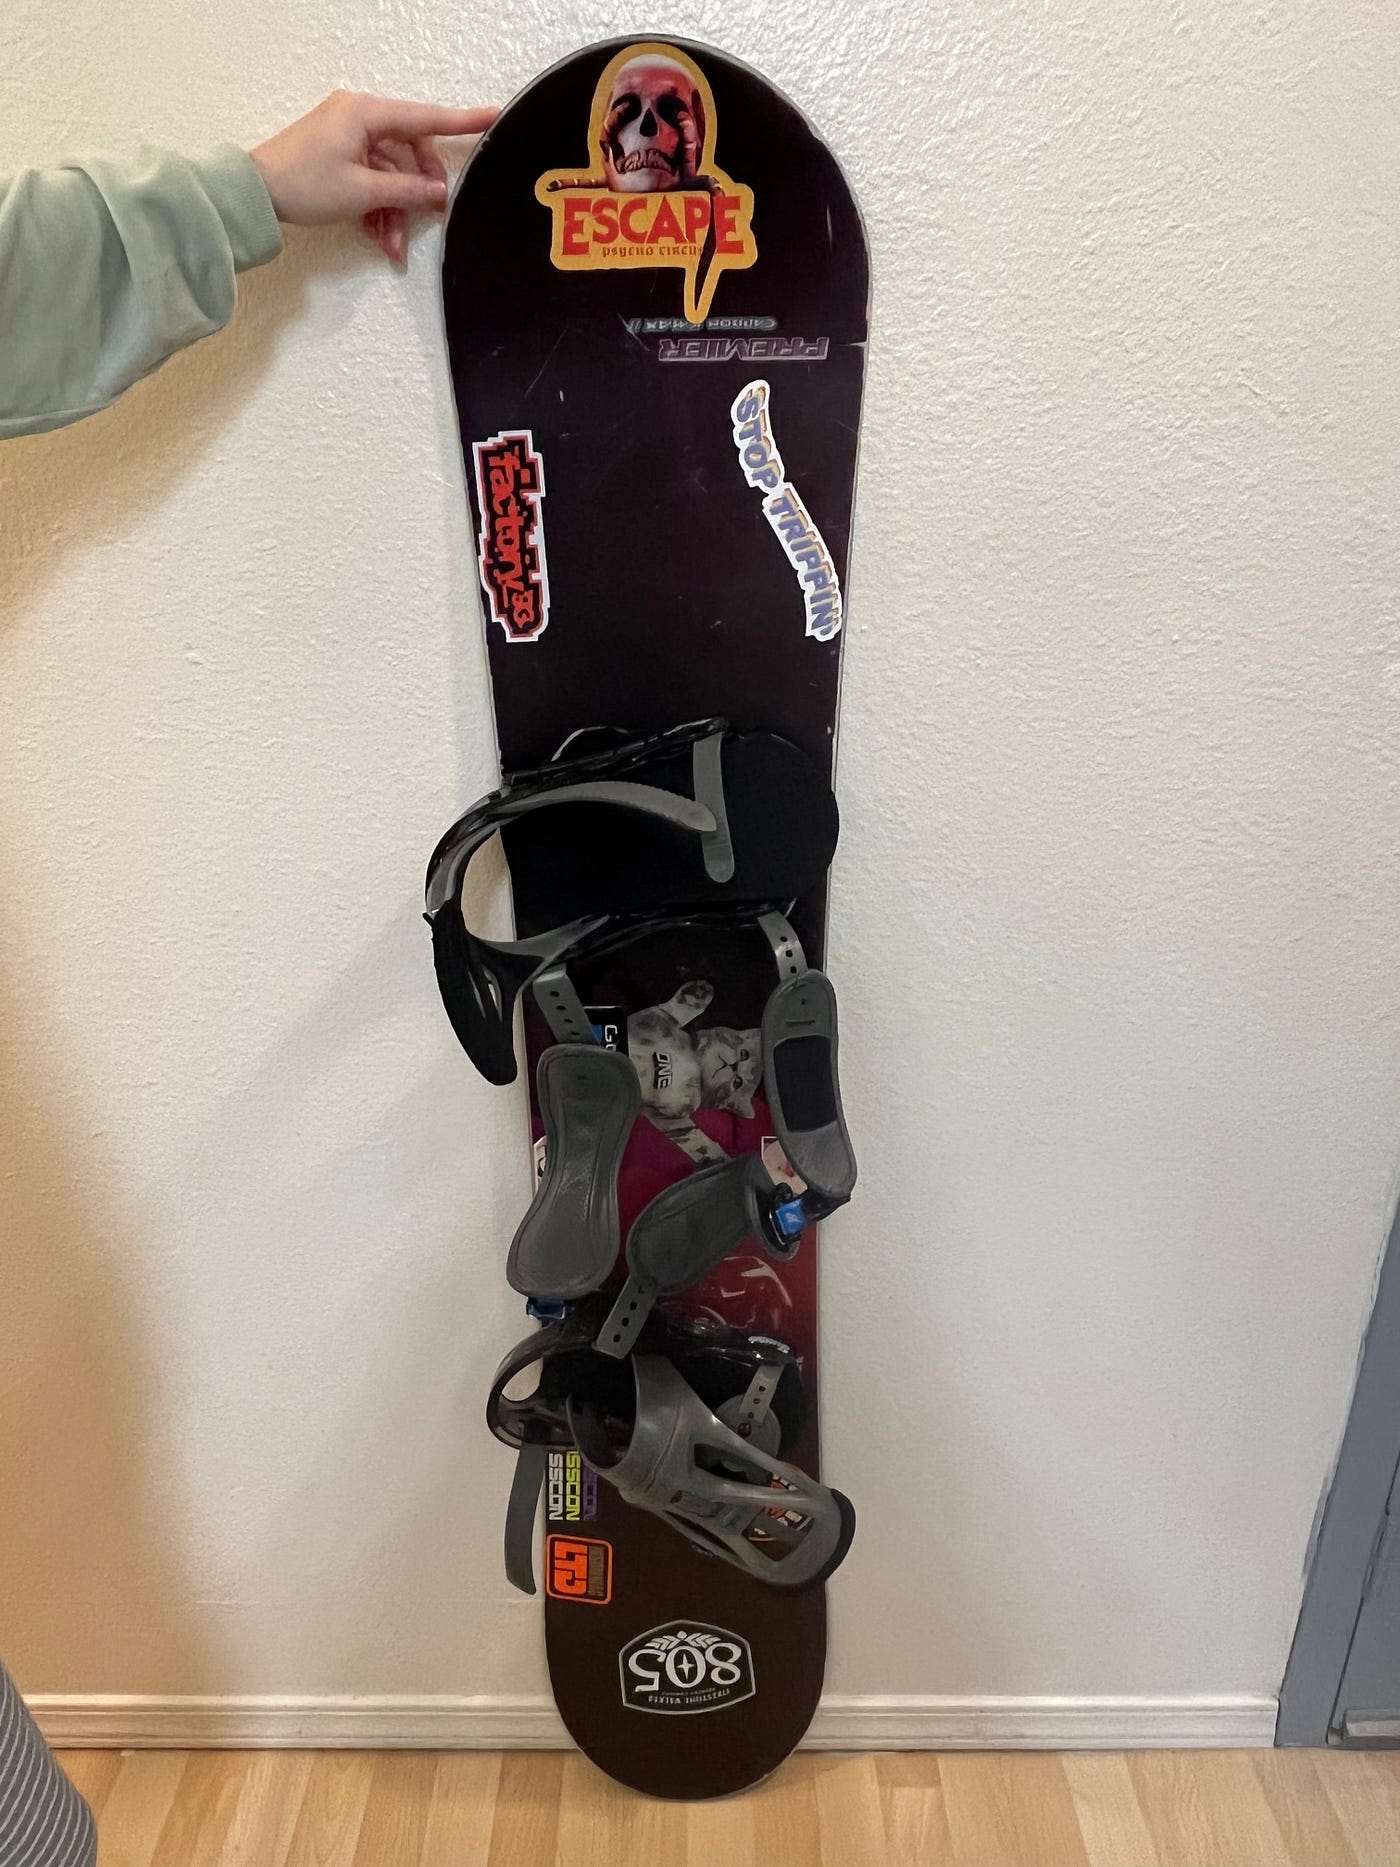 How to Mount Bindings on Your Snowboard” | by Charlie Cook | Medium